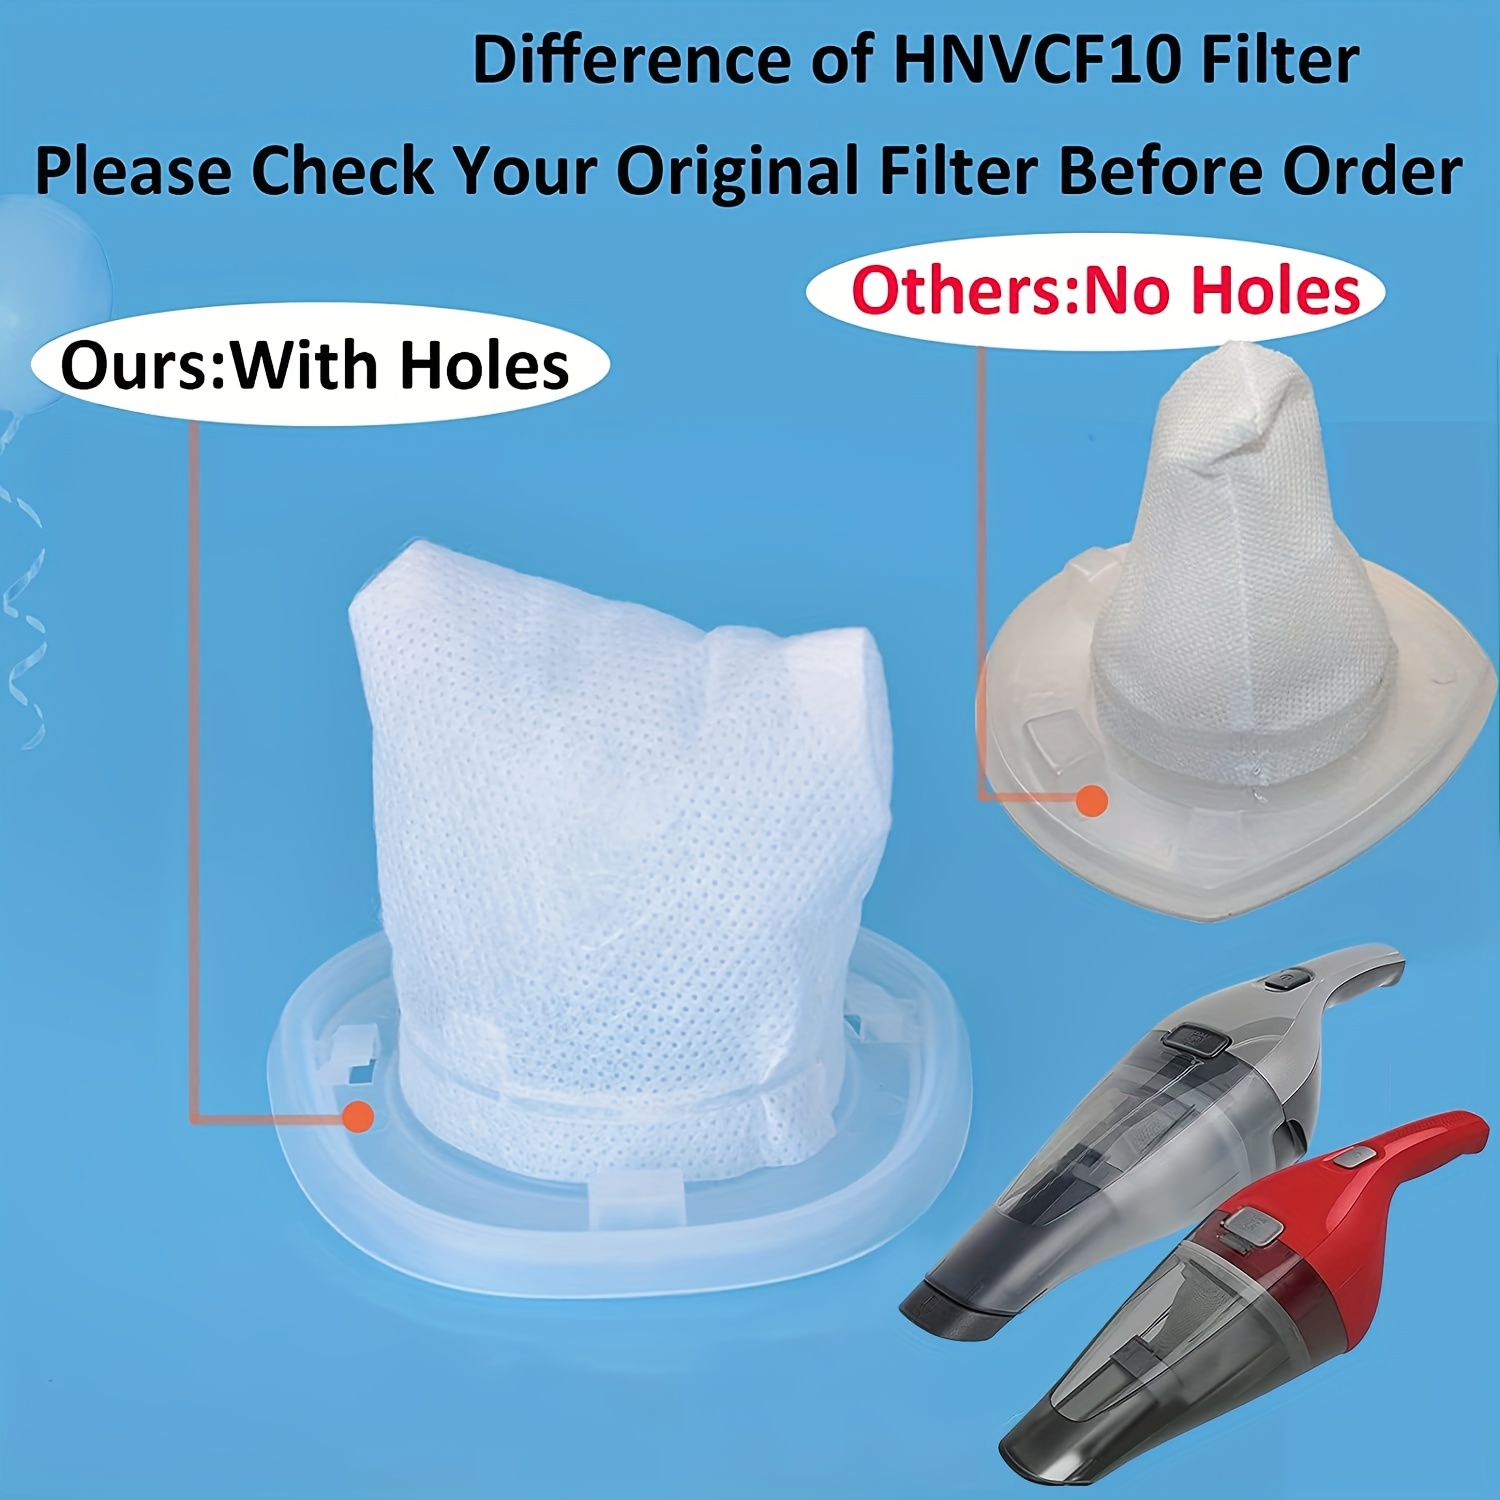 EVF100 Filters (3-pack) for Black & Decker - fit BDH7200CHV